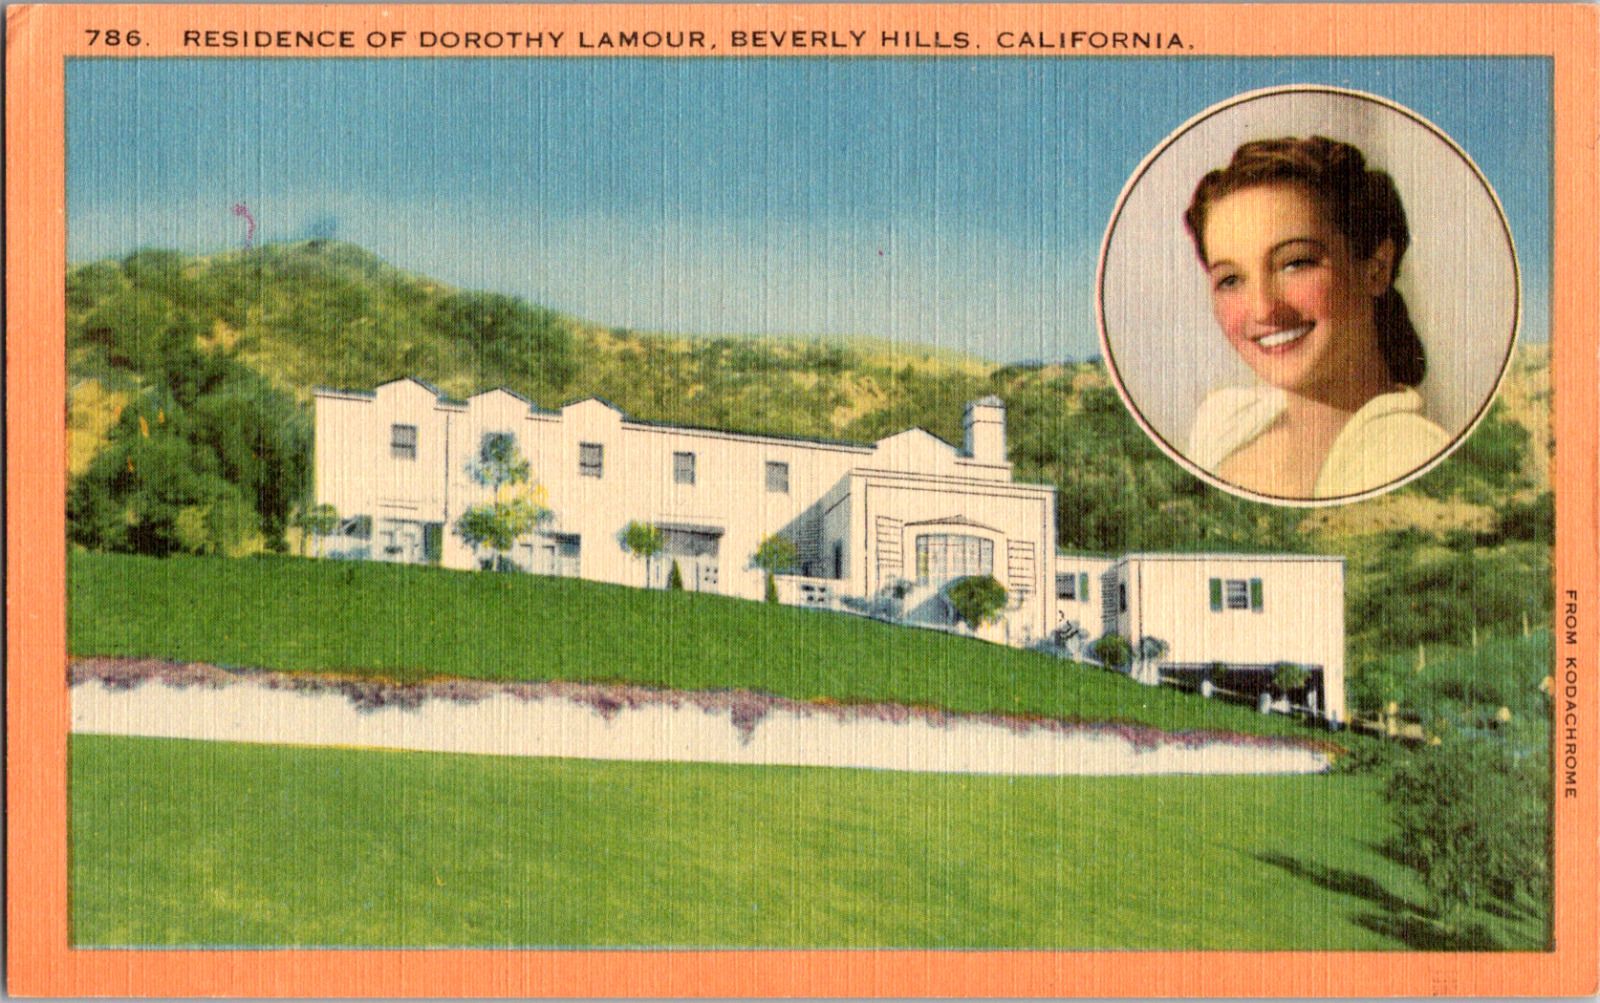 Vintage 1930s Home & Photo Dorothy Lamour Beverly Hills California CA Postcard